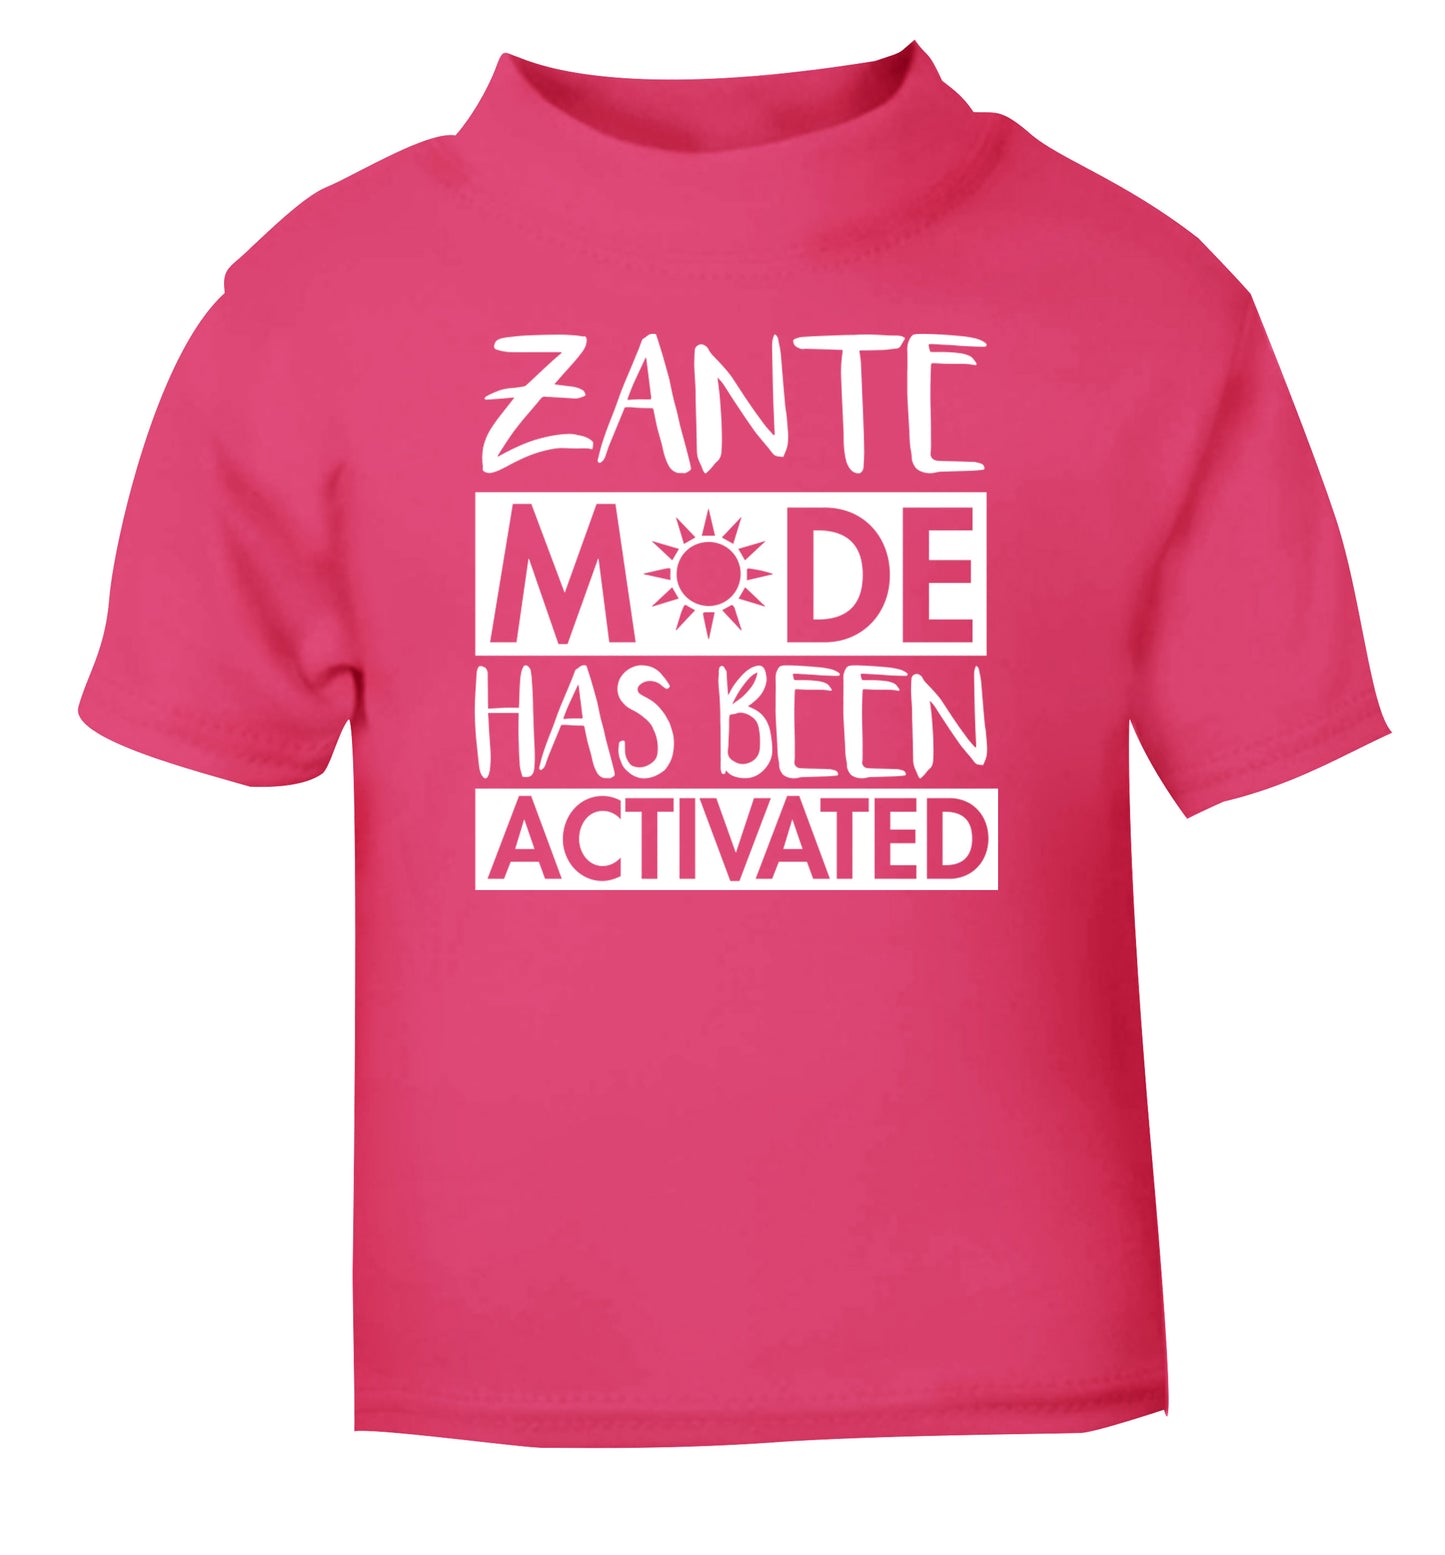 Zante mode has been activated pink Baby Toddler Tshirt 2 Years